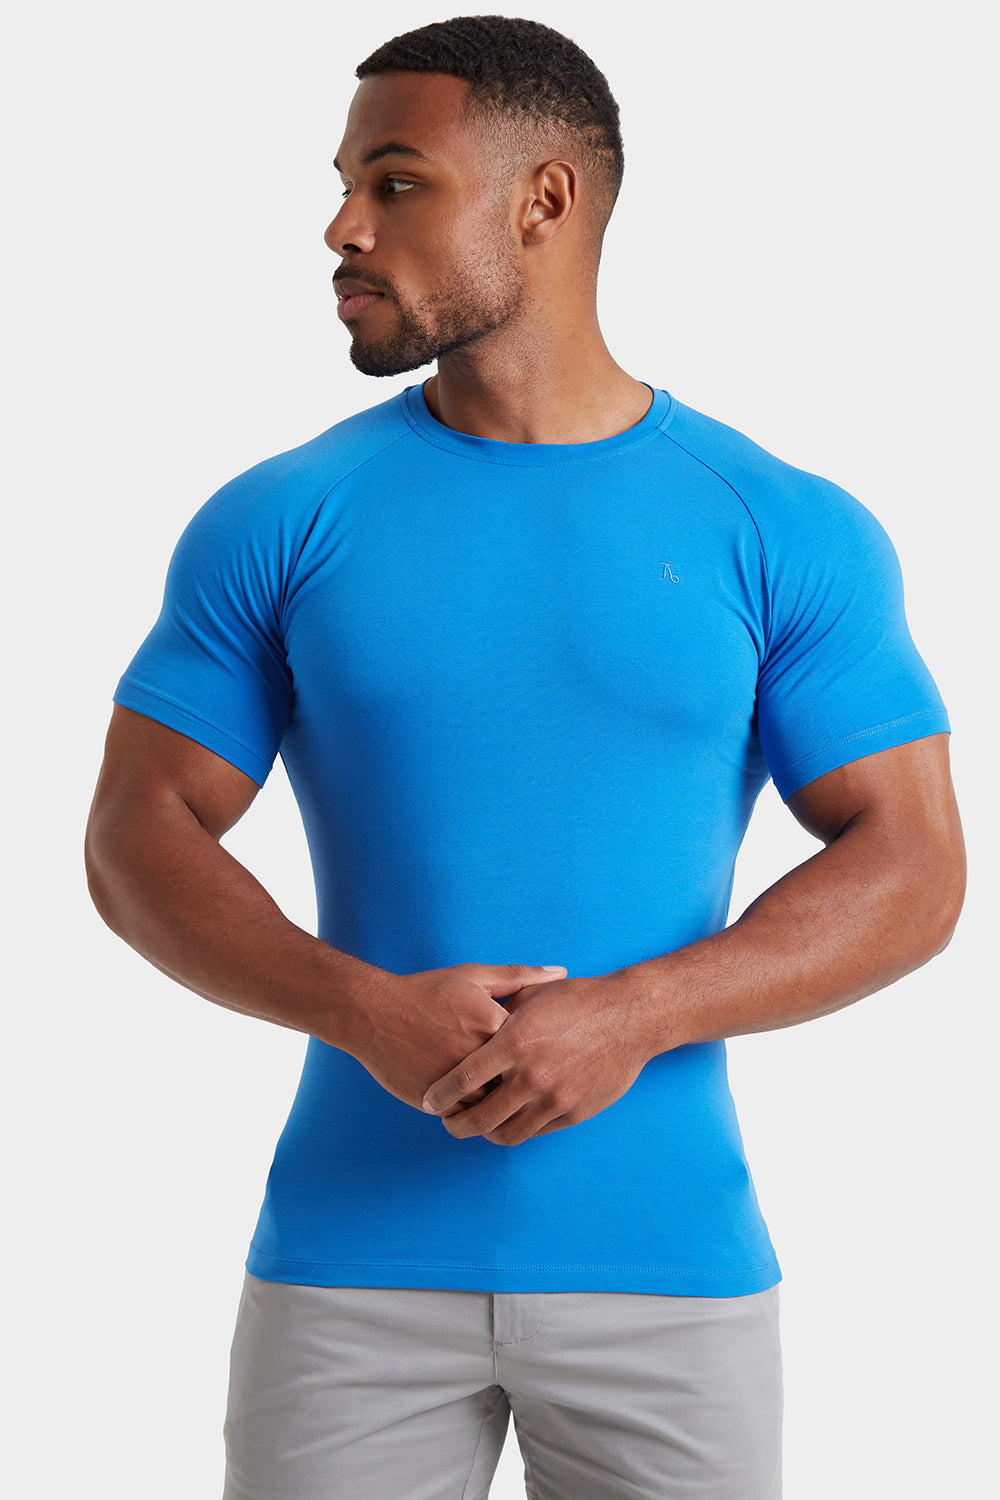 Premium Muscle Fit T-Shirt in Azure Blue - TAILORED ATHLETE - ROW